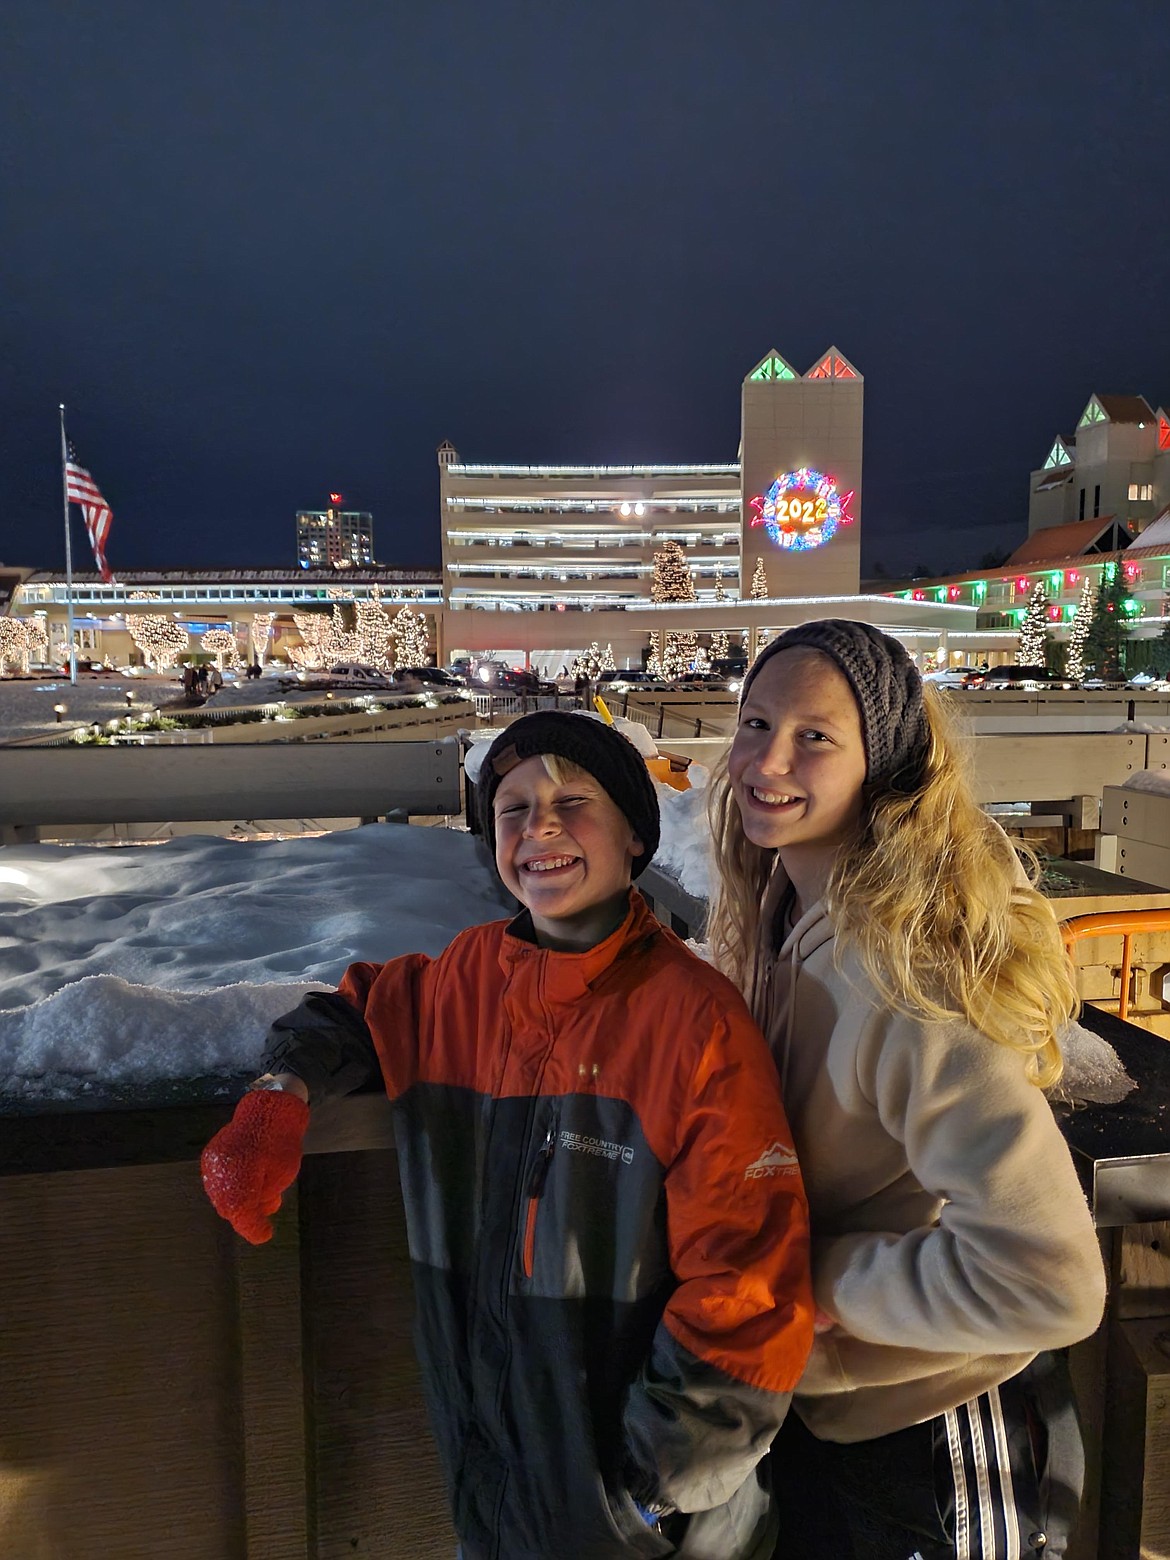 "My kids Amber and Malachi Christiansen in front of the Coeur d'Alene Resort. (photo by Michelle Christiansen)